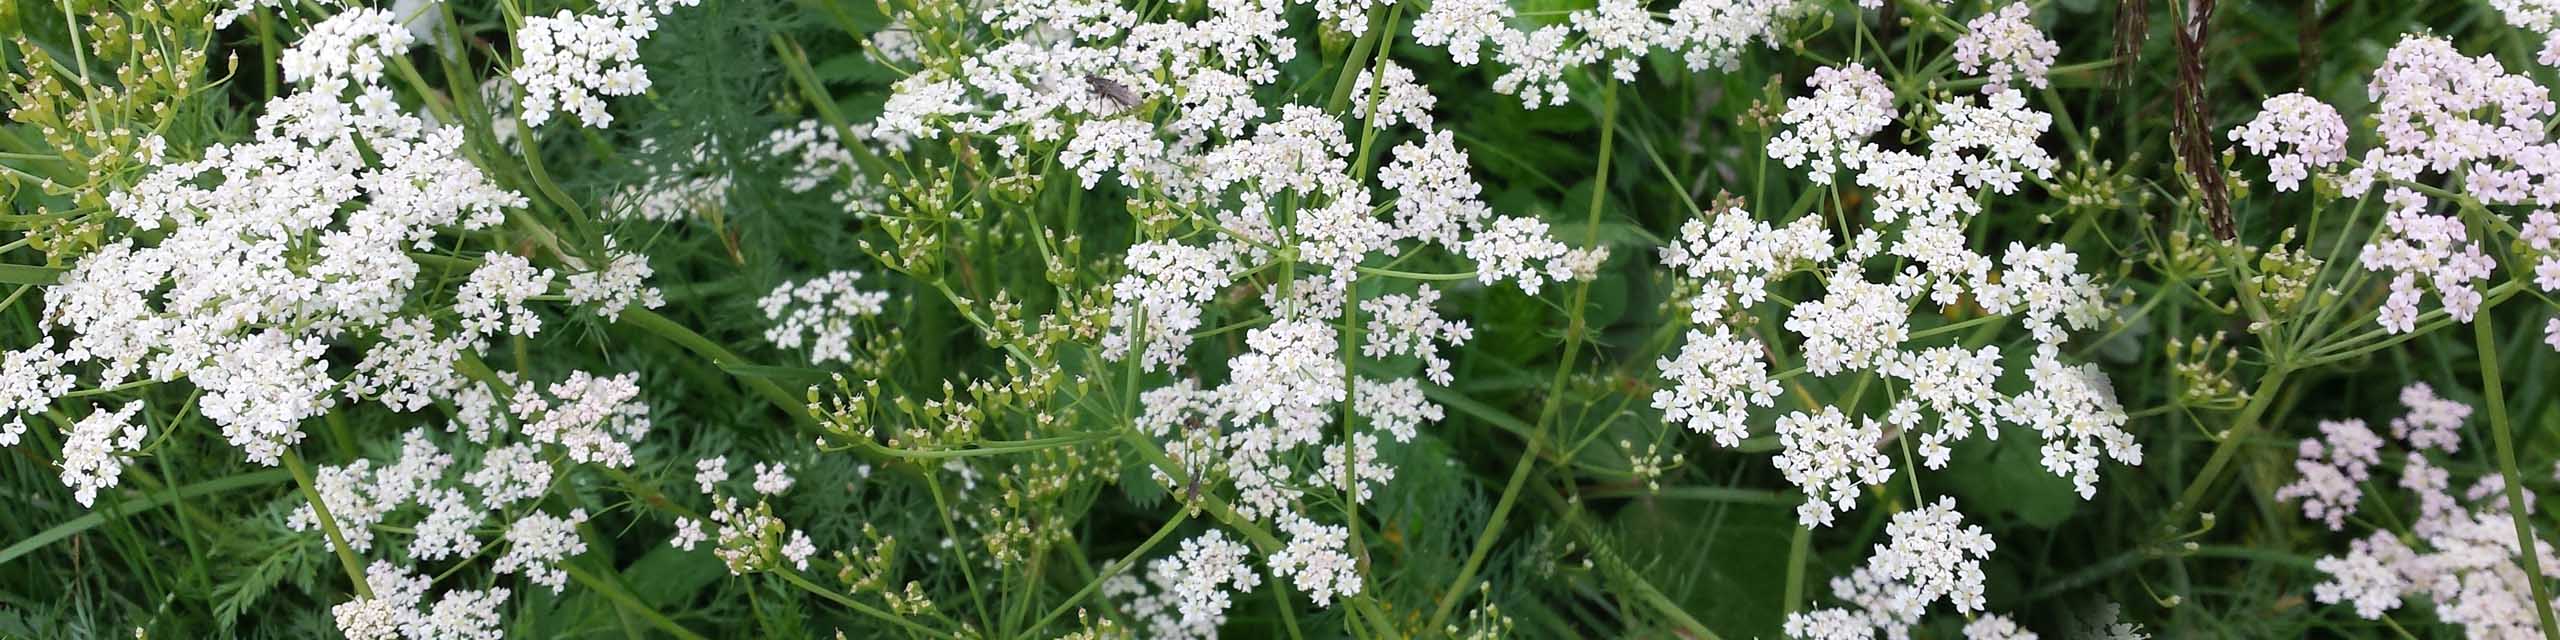 Caraway plants with with blooming flower clusters.